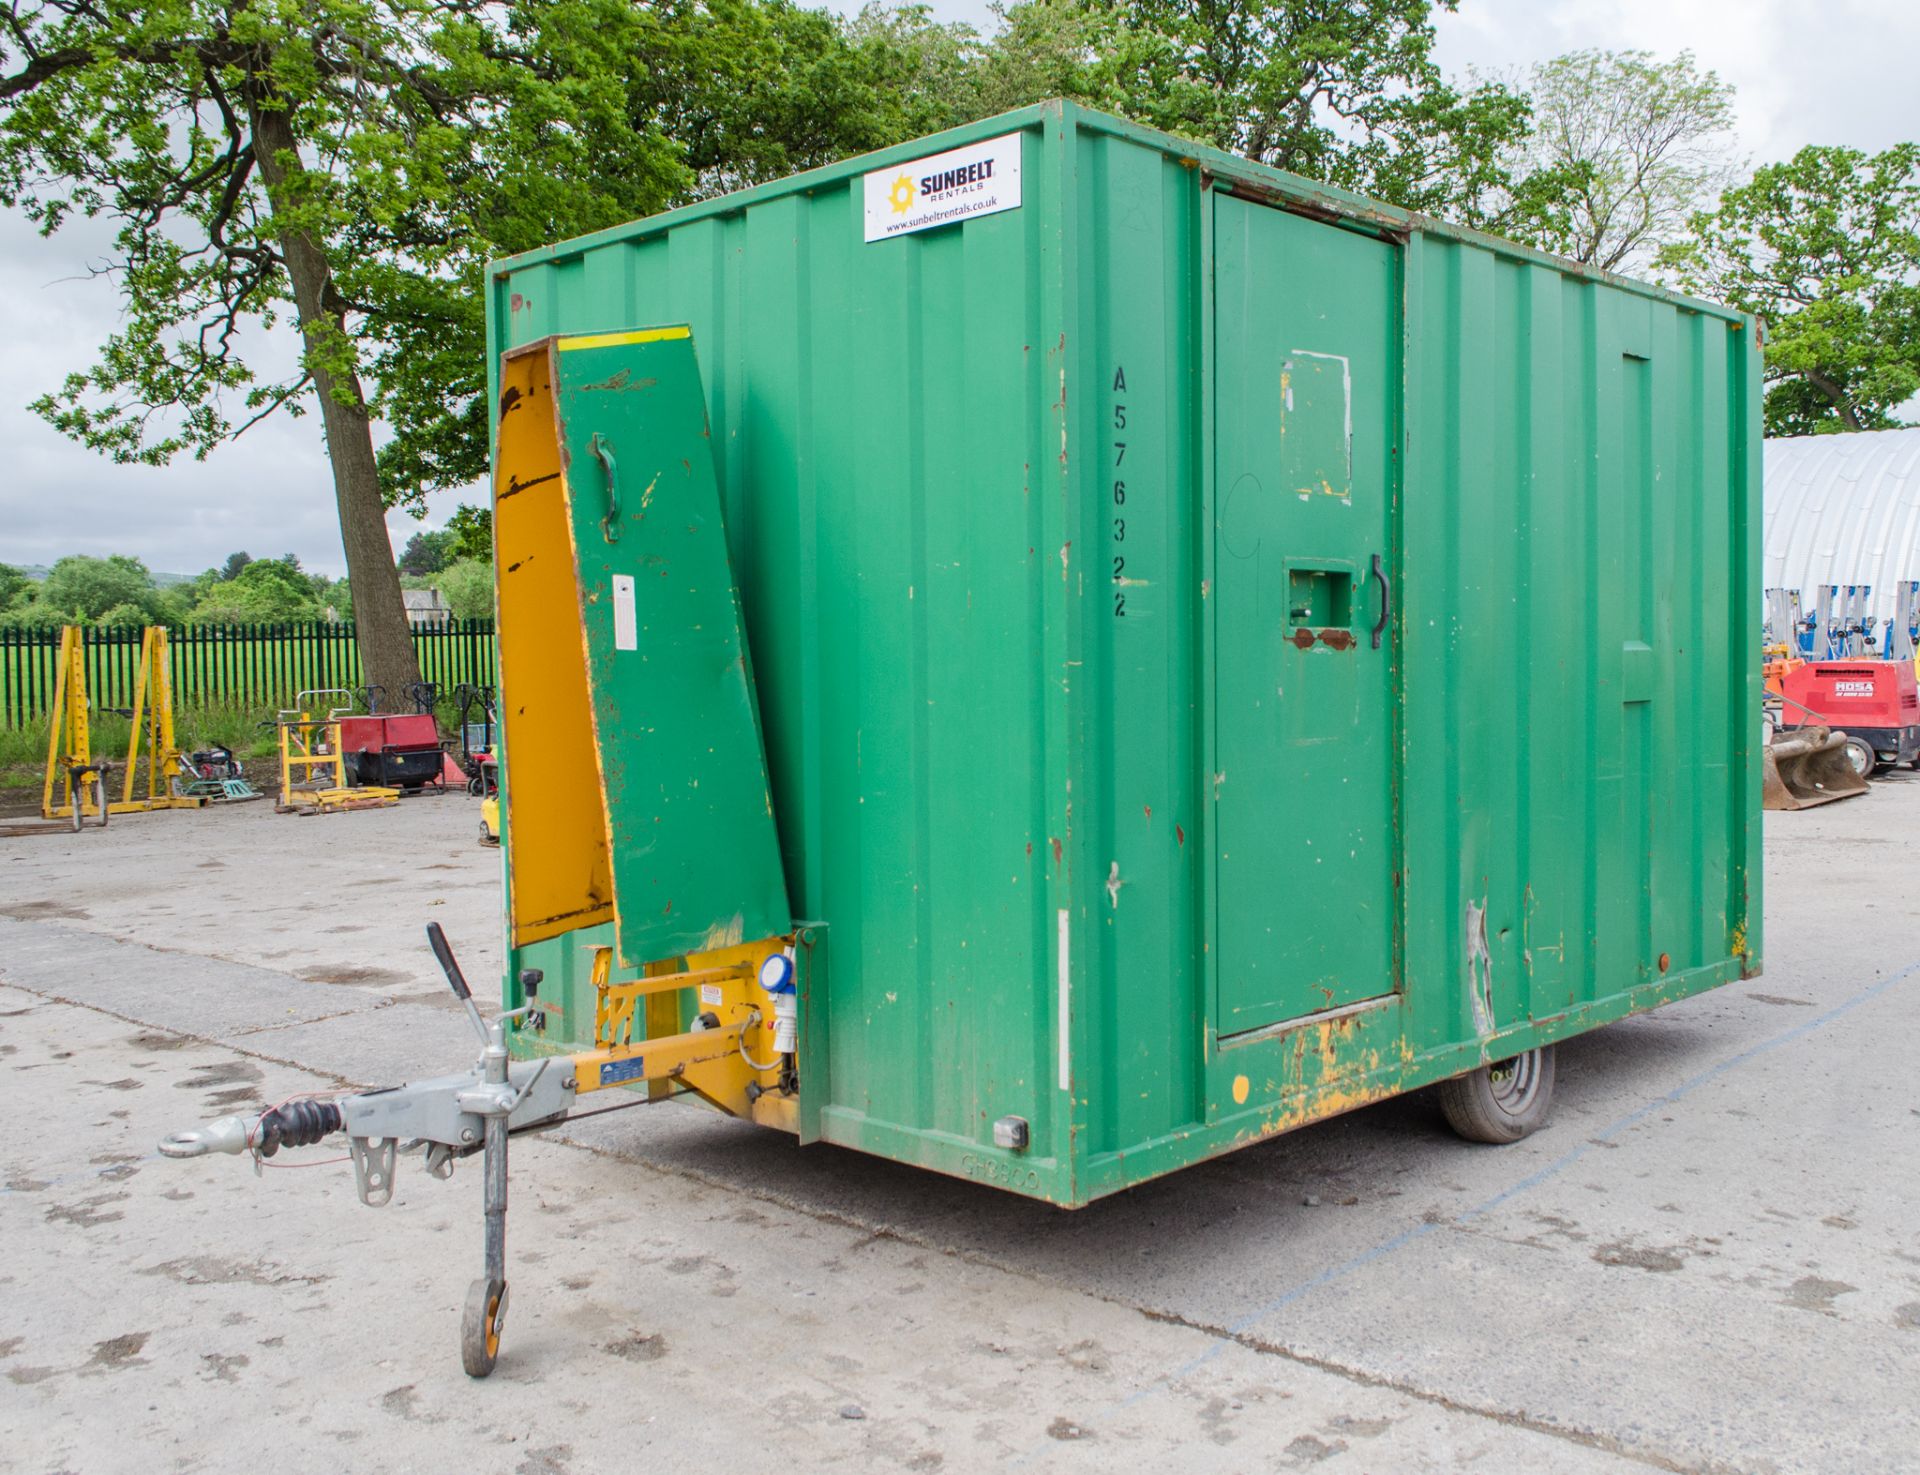 Groundhog 12 ft x 8 ft mobile welfare site unit Comprising of: canteen area, toilet & generator room